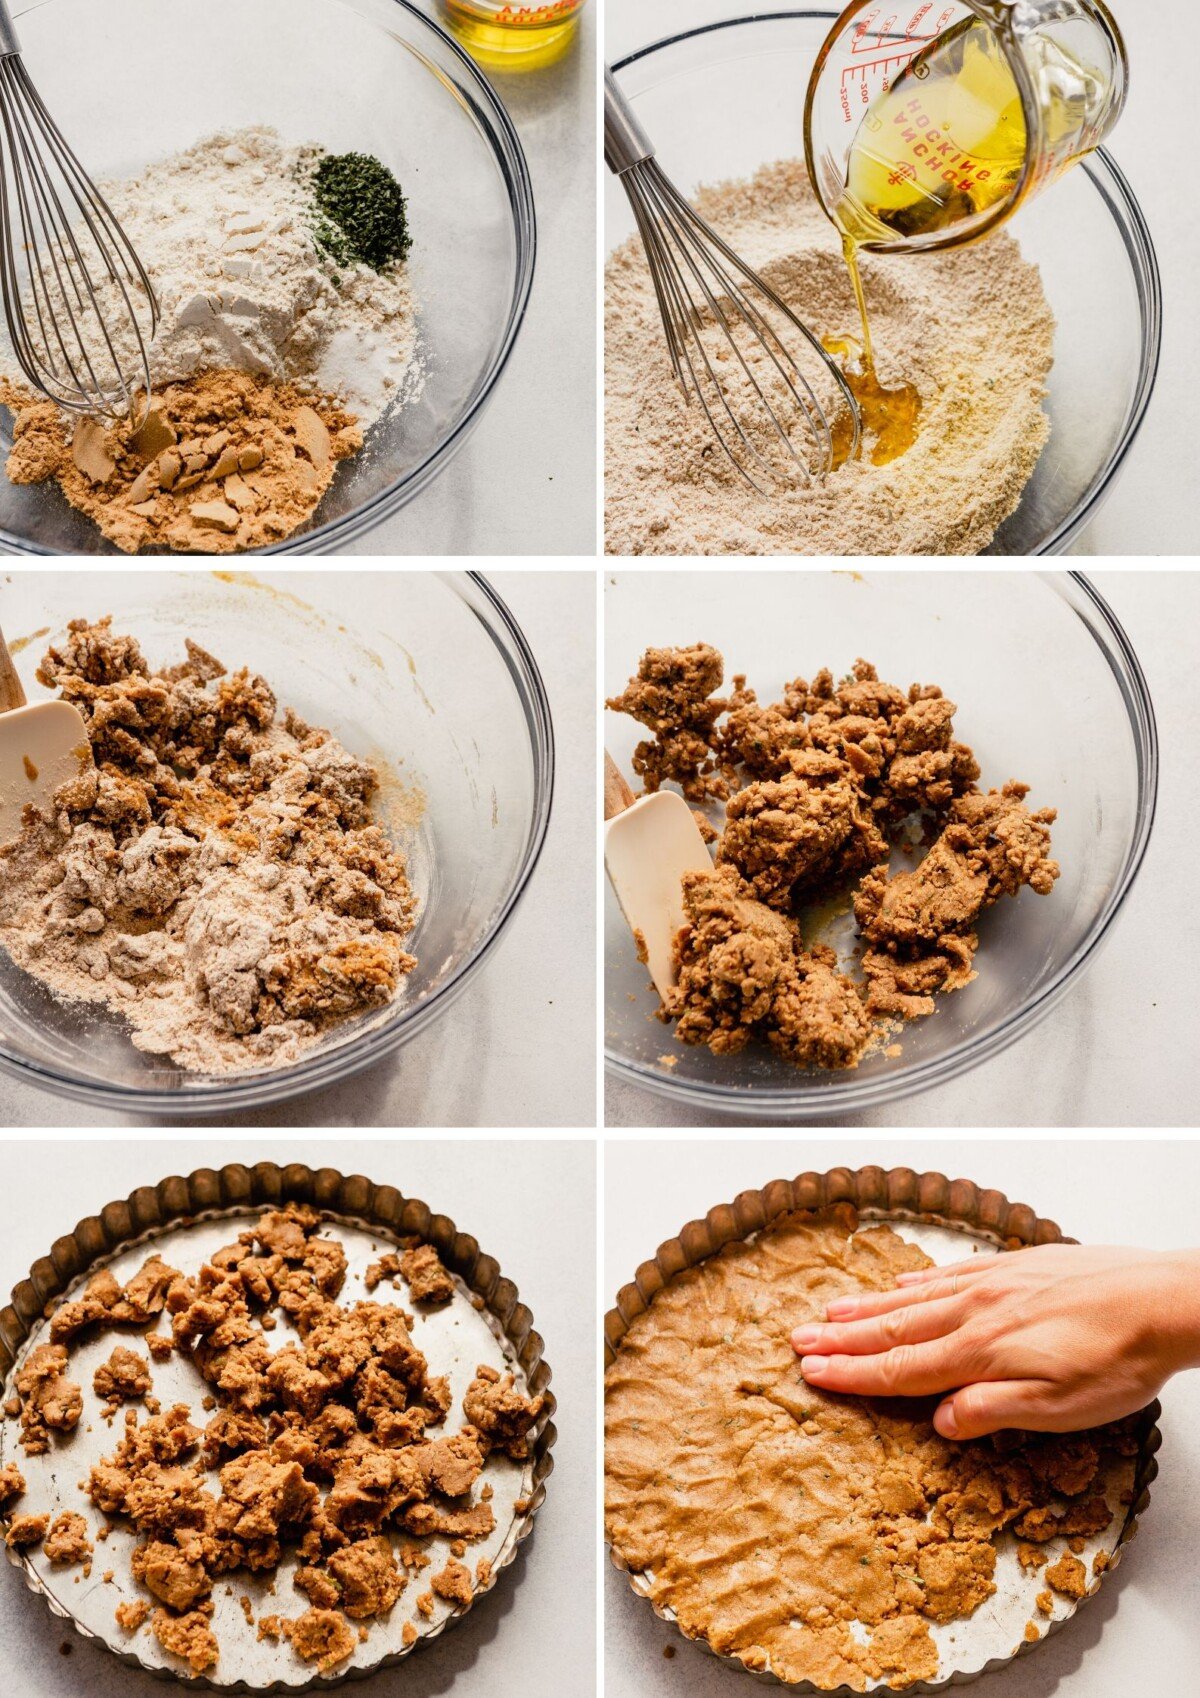 grid of images showing the process of making the tart crust—combining dry ingredients in a bowl, adding wet ingredients, mixing, pressing in to tart pan